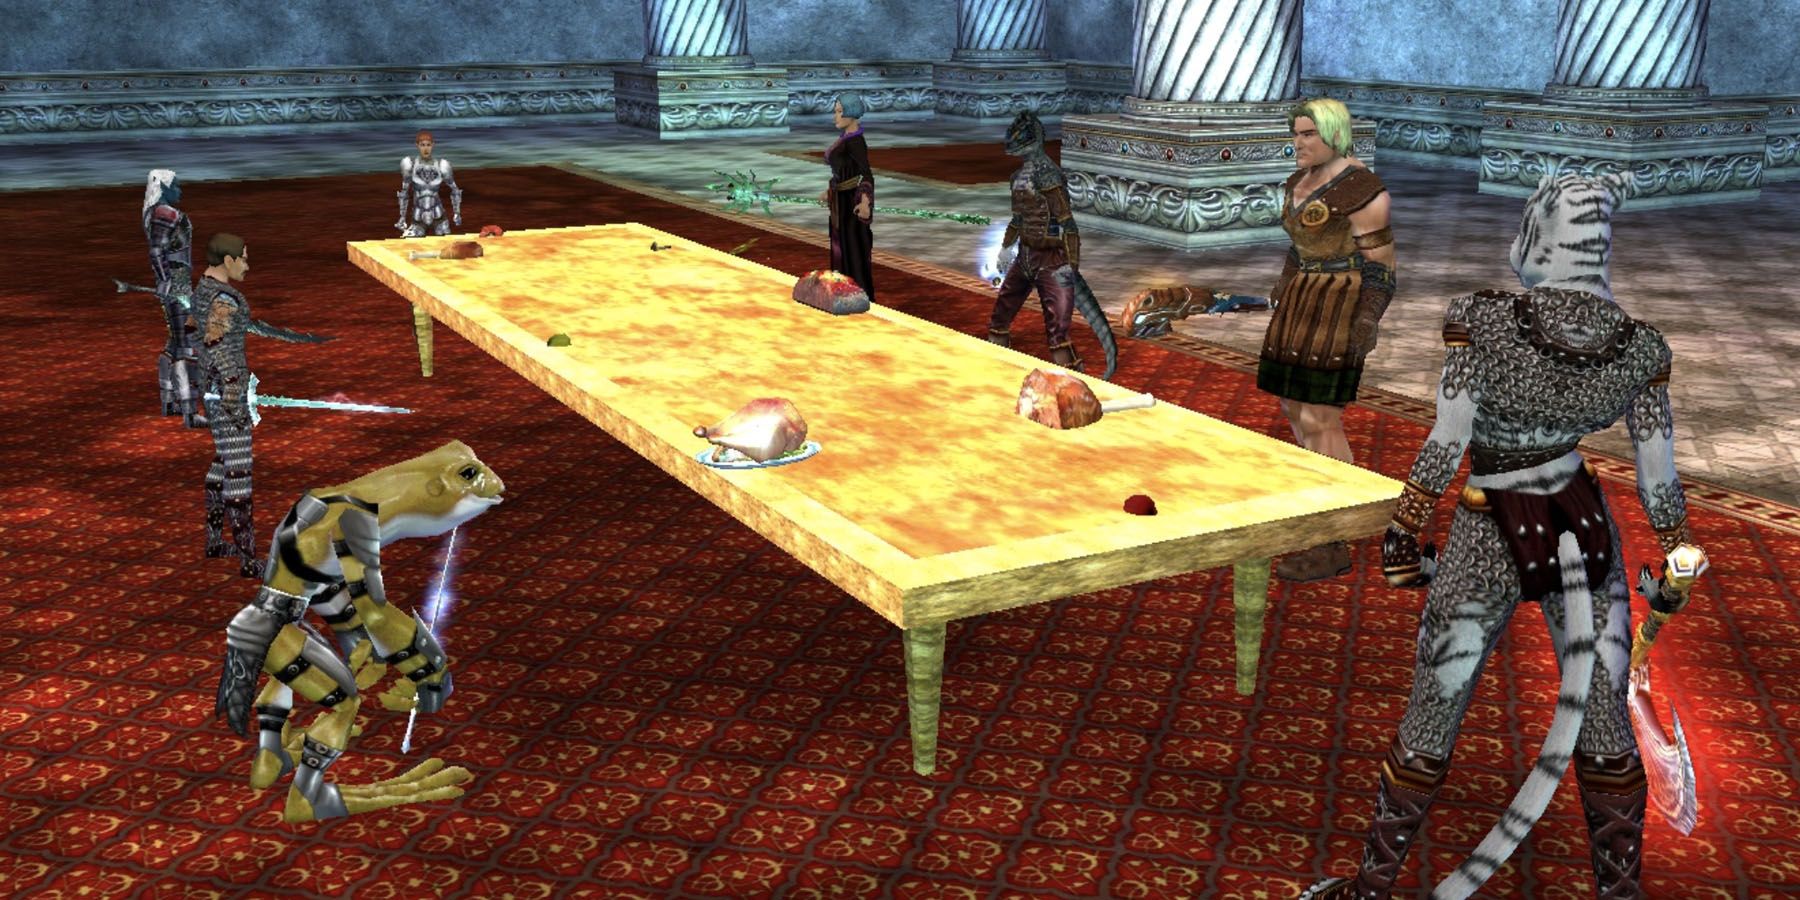 EverQuest characters around a table